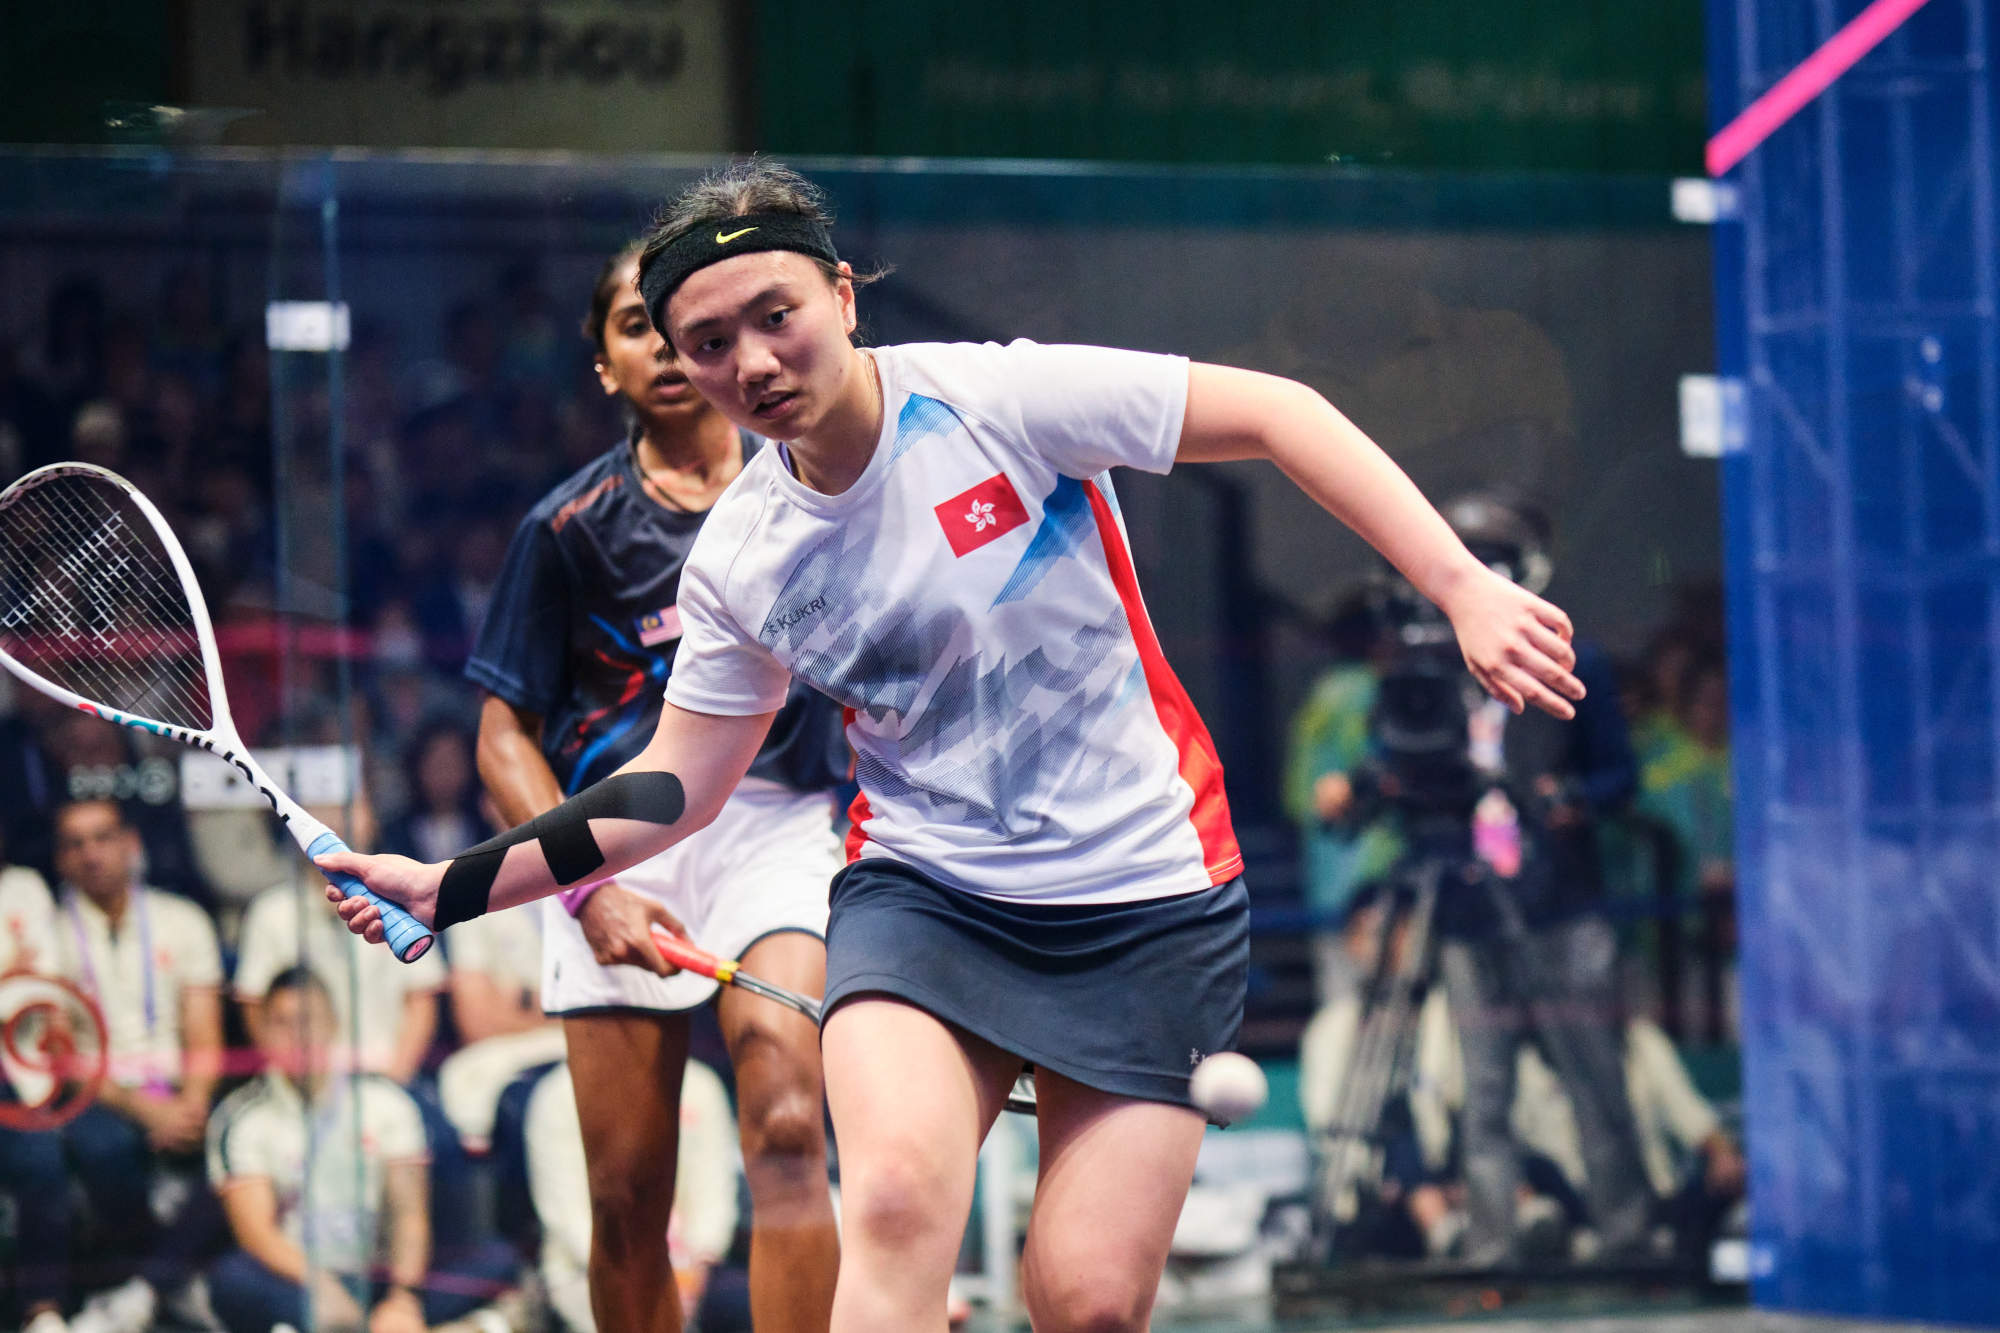 hong kong squash open: costly event pushed up ticket prices but fans getting ‘very good deal’, official says